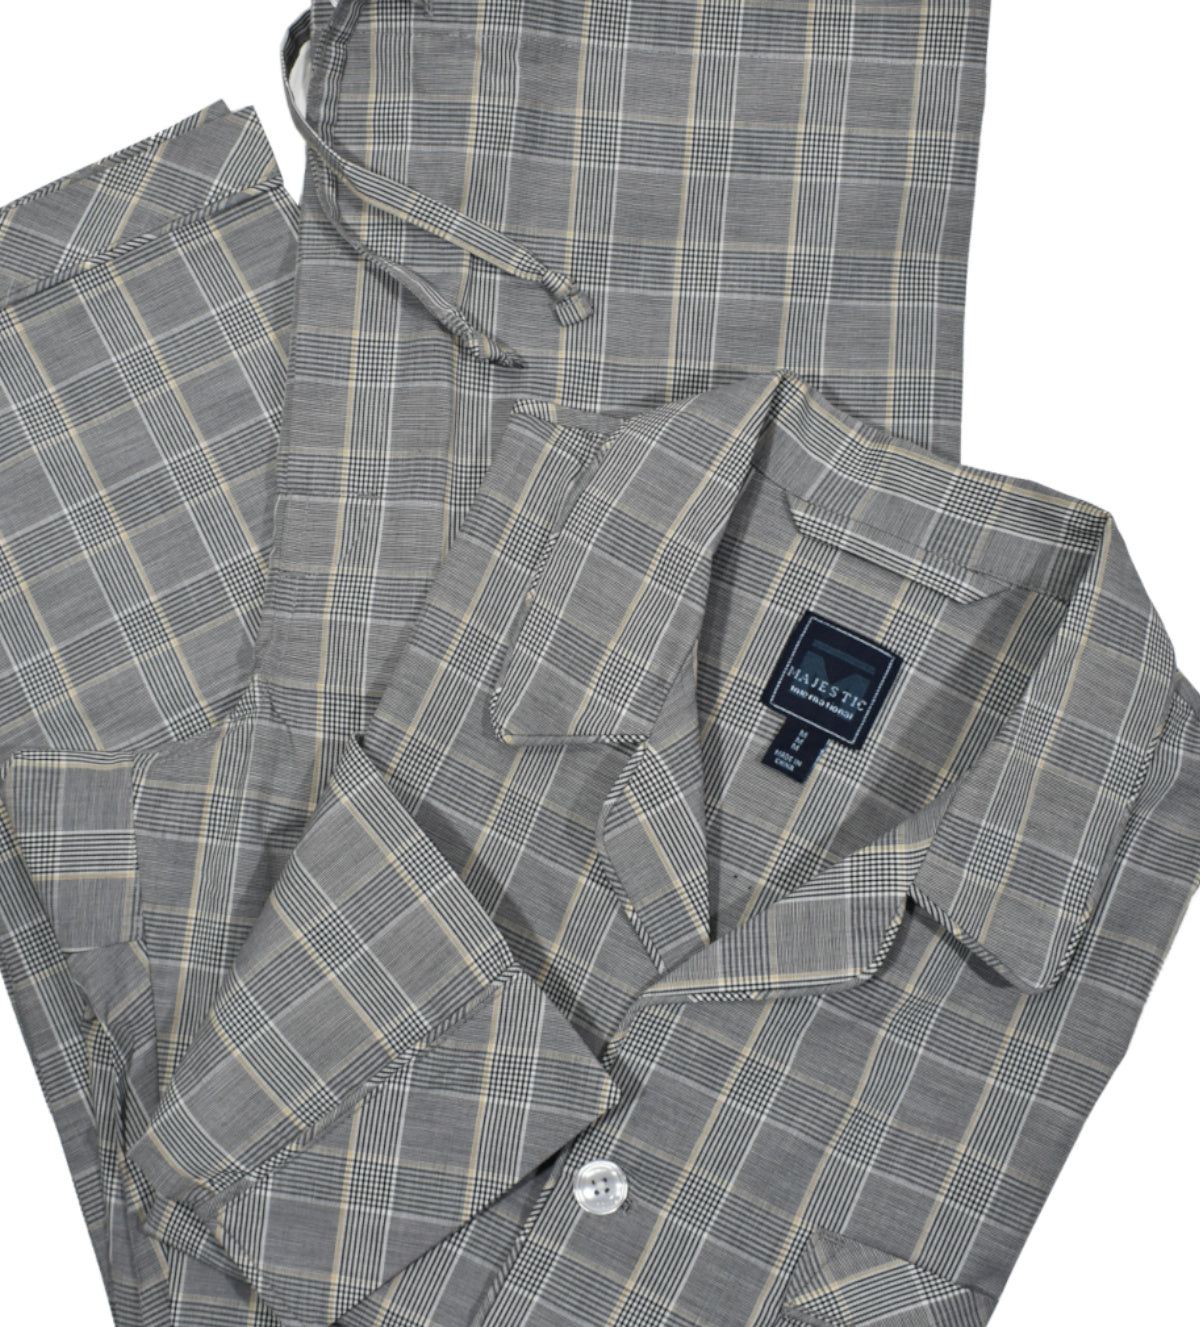 Be comfortable and timelessly elegant with the ZM1906 Glen Plaid Pajama. Its classic plaid pattern and rich colors are crafted in soft cotton fabric for a chic yet cozy nightwear look. The button front top and drawstring pant with a stretch waistband and functional fly make this classic fit pajama the perfect addition to your loungewear collection. 